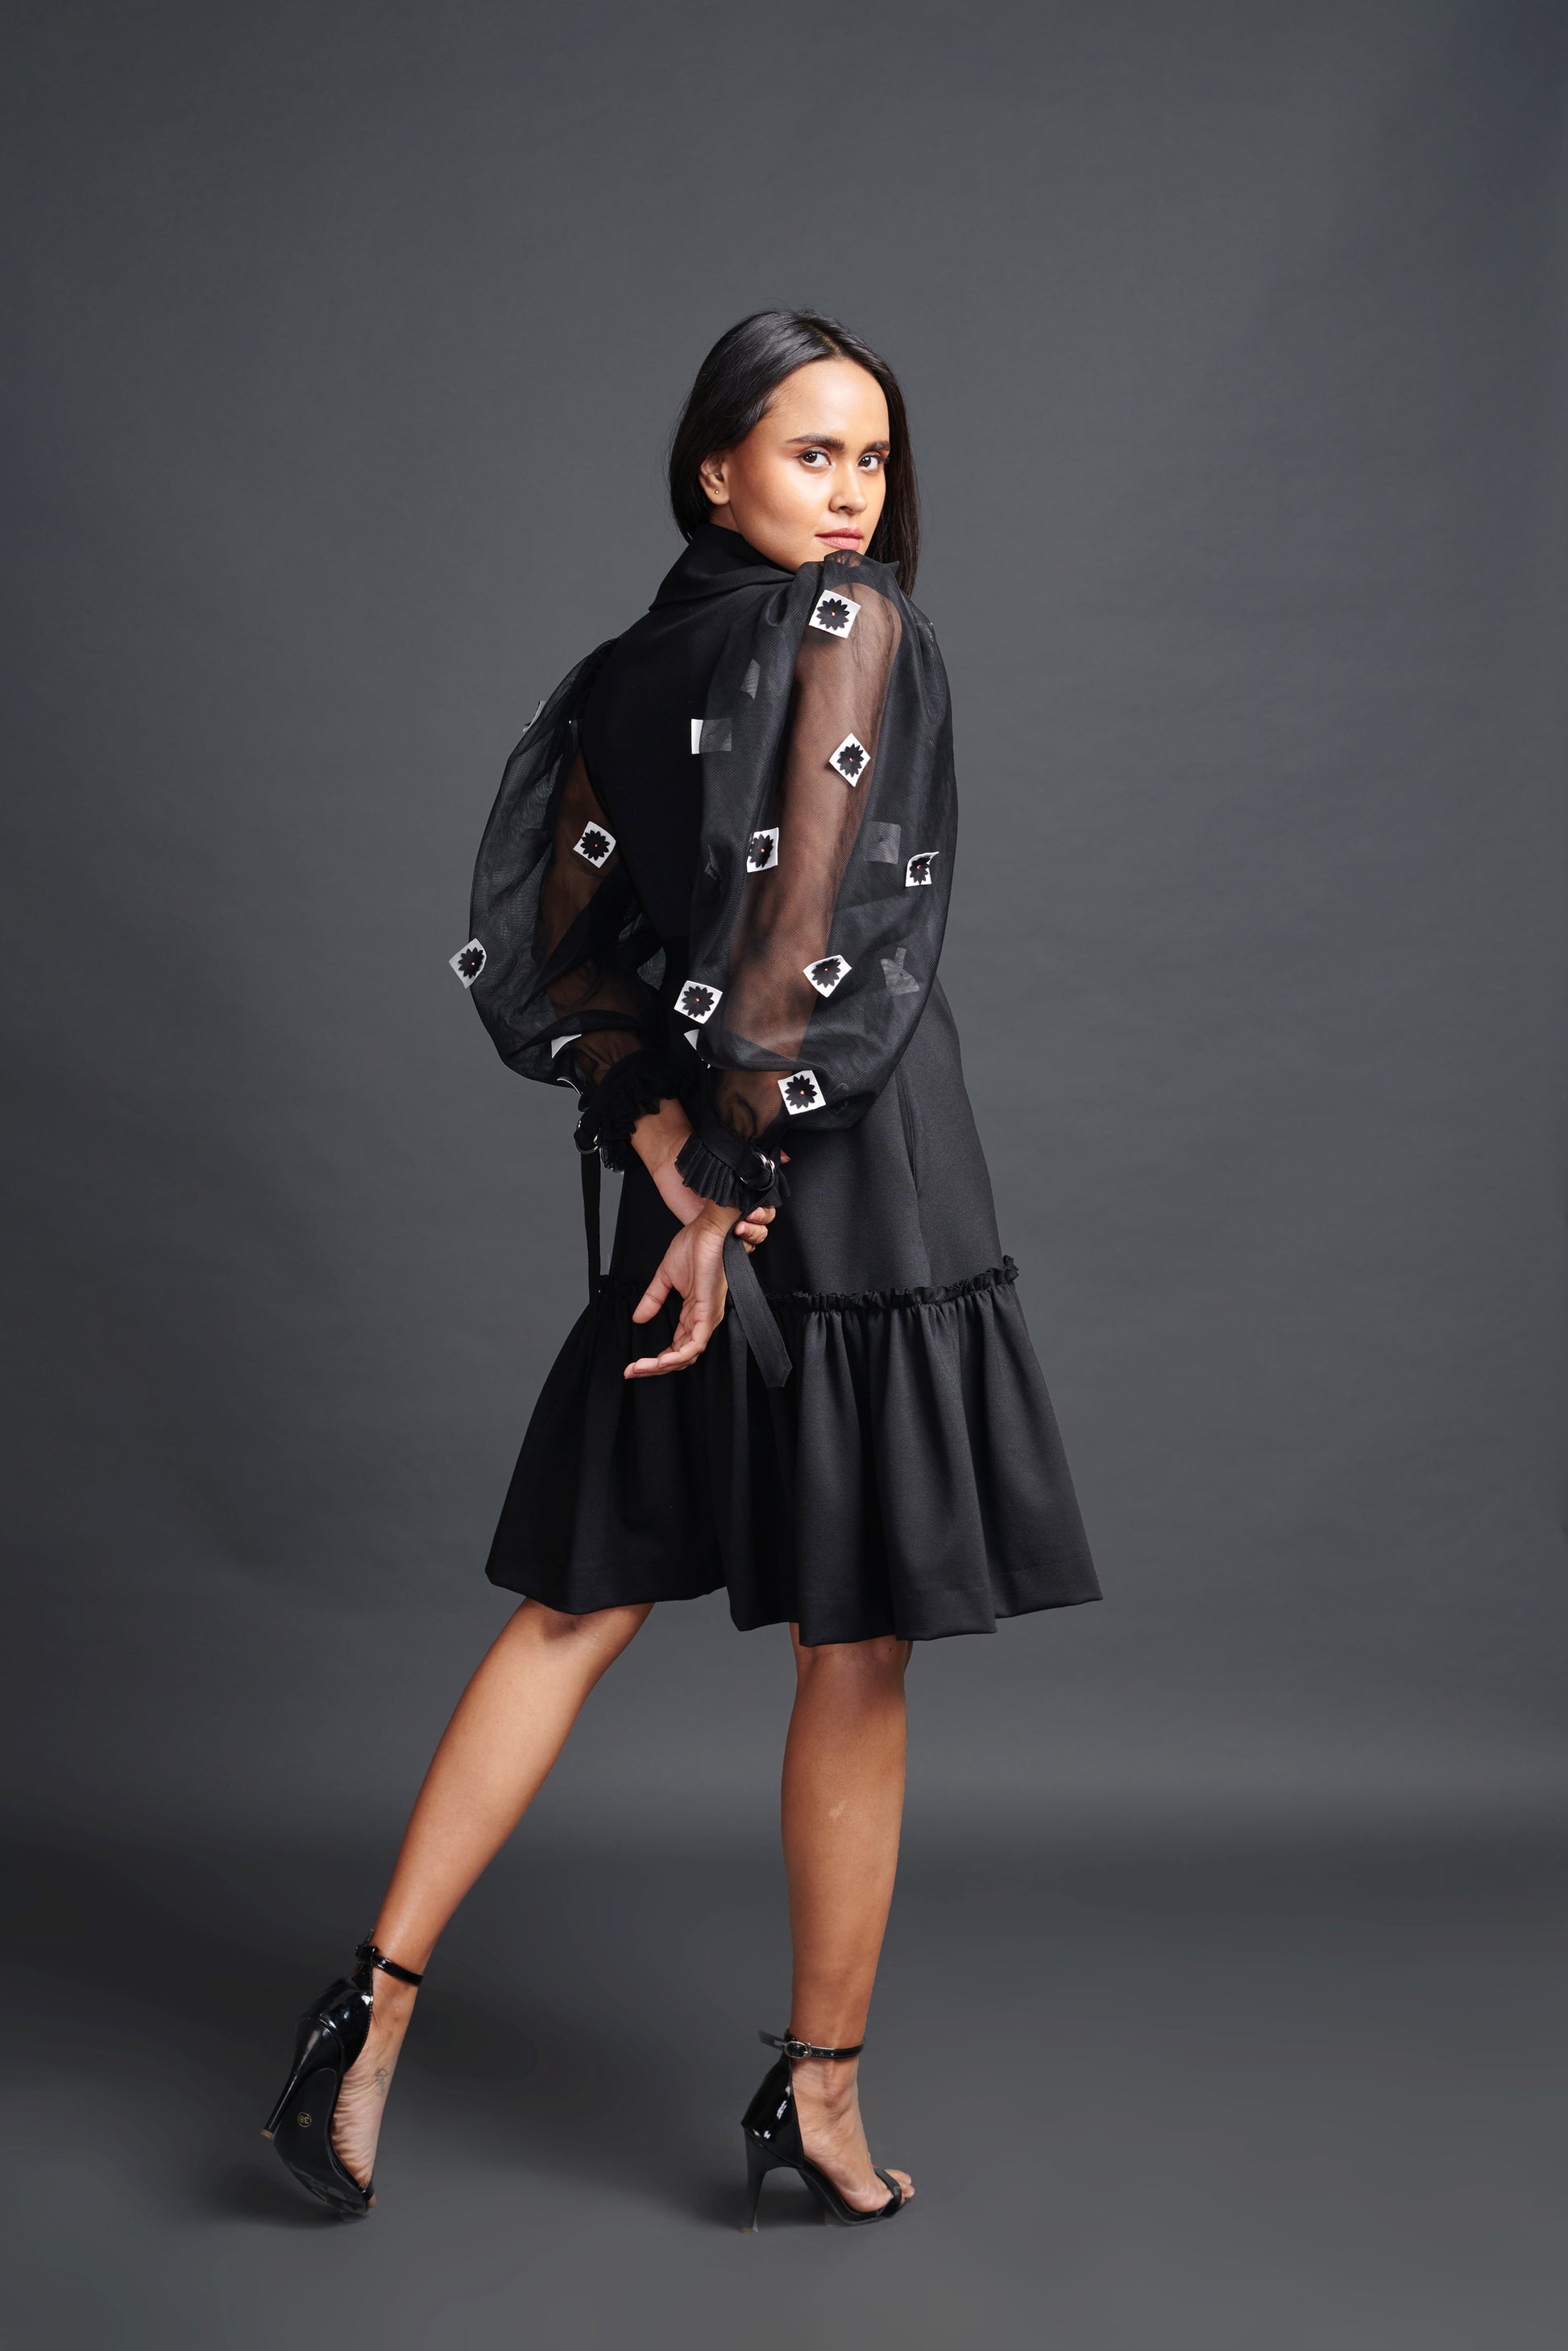 Image of BLACK JACKET DRESS WITH CUTWORK ON PUFFED SLEEVES. From savoirfashions.com